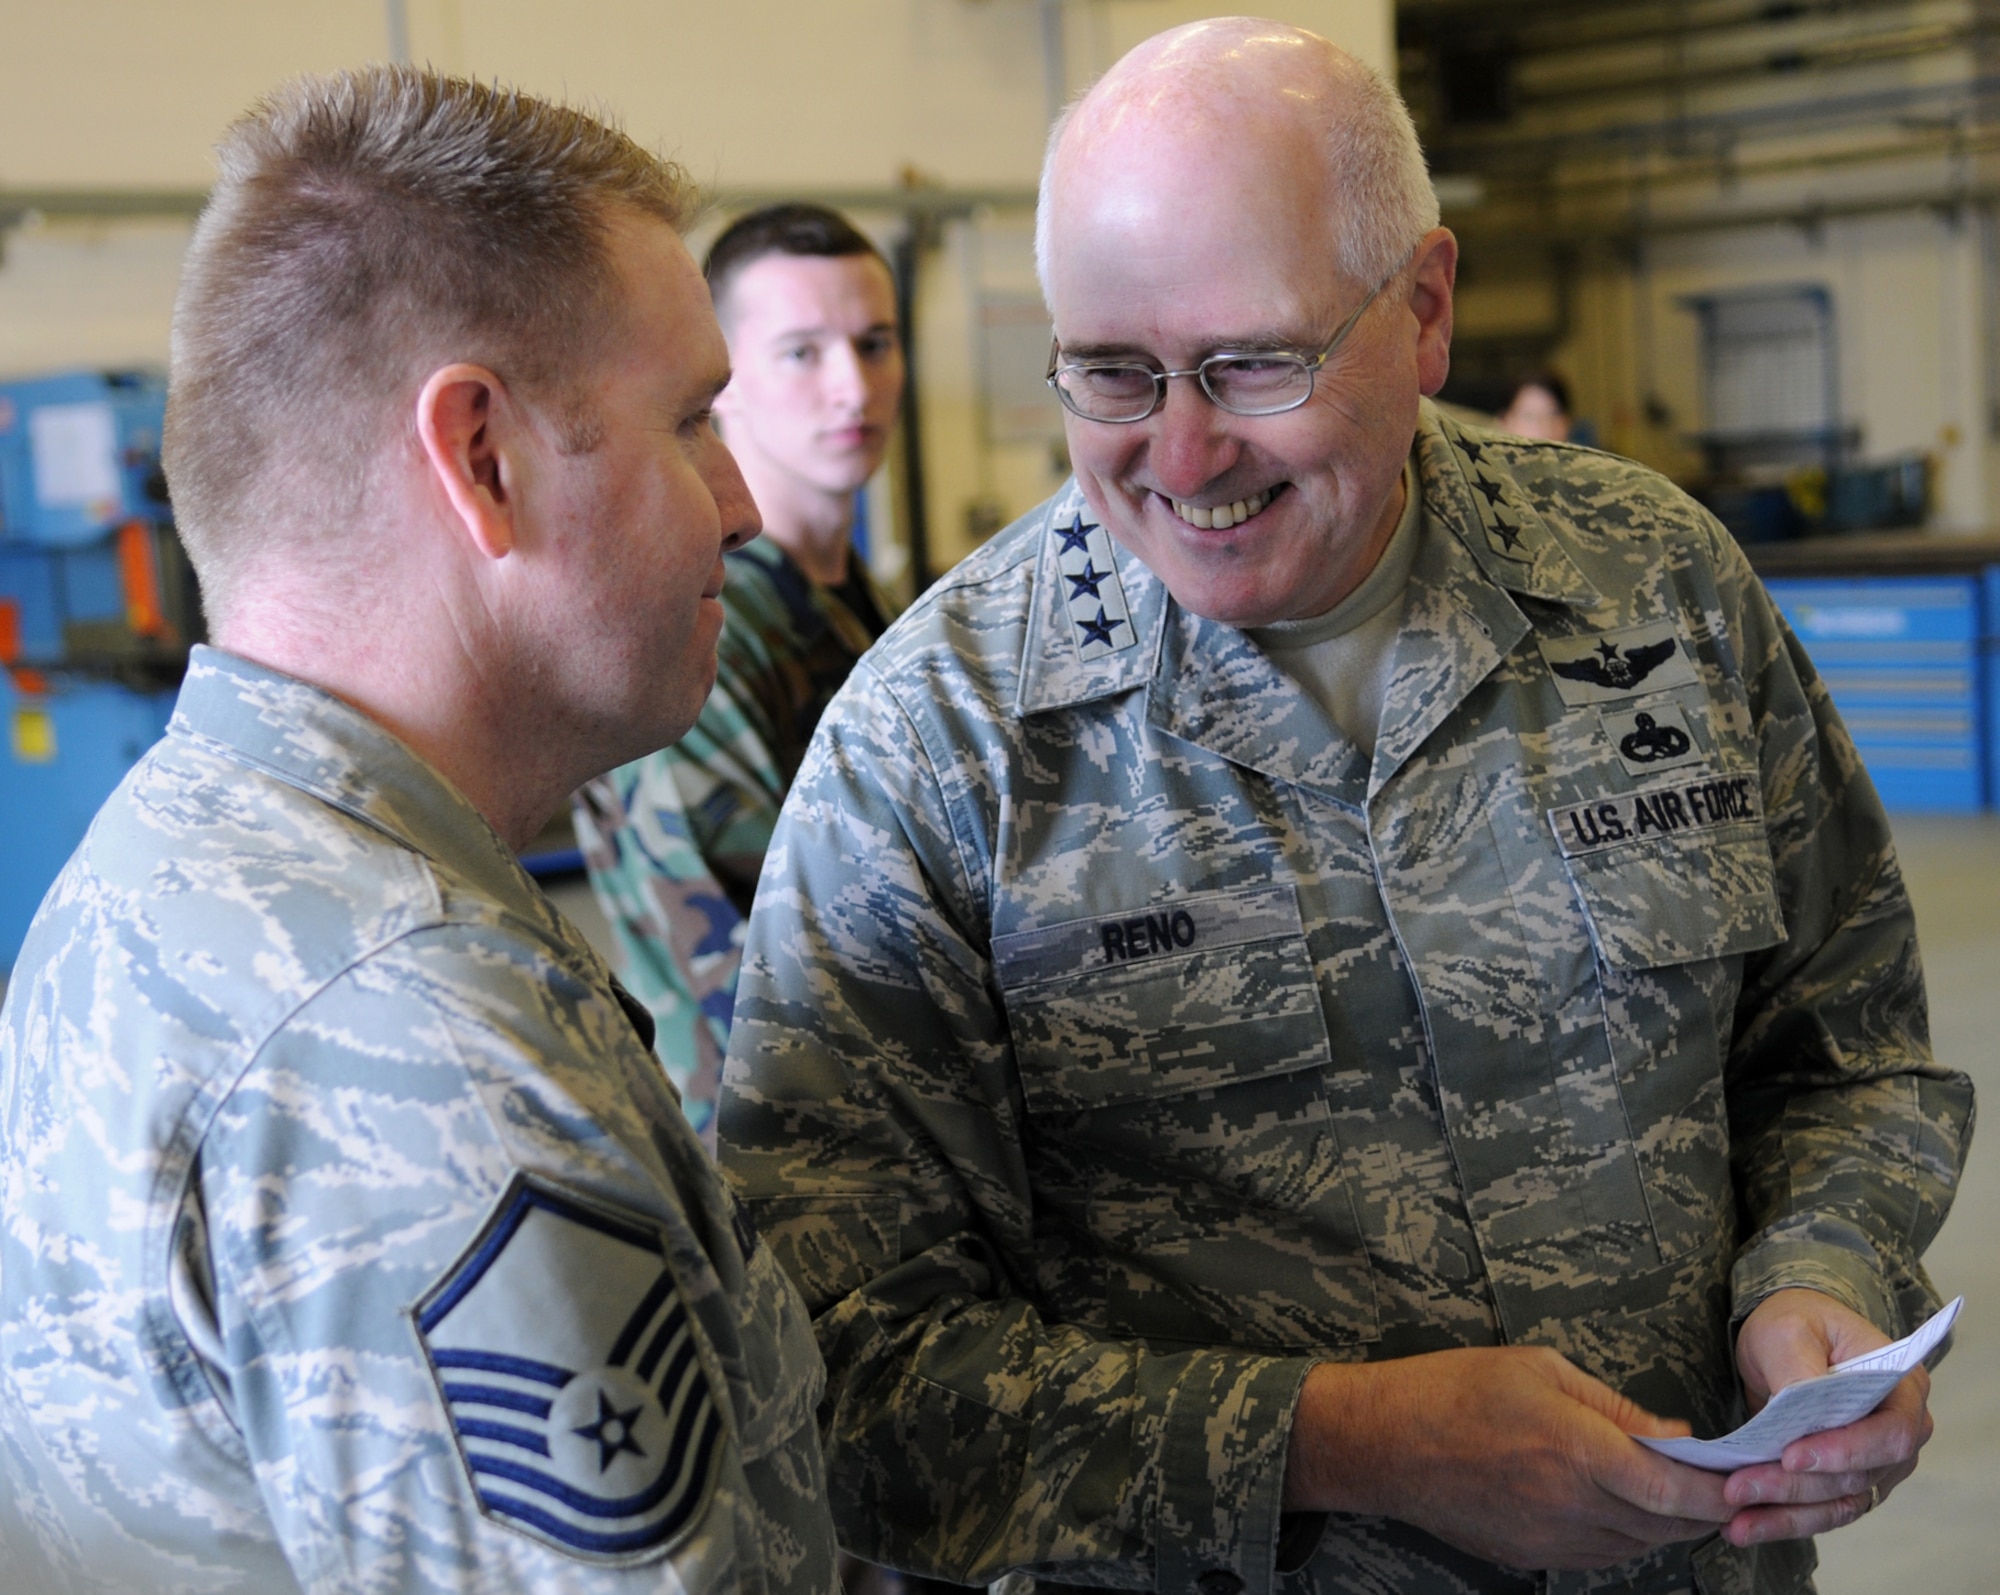 Lt. Gen. Loren M. Reno, the deputy chief of staff for logistics installations and mission support headquarters U.S. Air Force, shares a laugh with Master Sgt. Maurice Milstead during his tour of the sheet metal shop here March 20, 2009. General Reno was invited to be the guest speaker for the 100th Maintenance Group's 2008 “Knucklebuster” banquet. He was also able to incorporate a site visit during his short time in England. (U.S. Air Force photo by Staff Sgt. Jerry Fleshman)